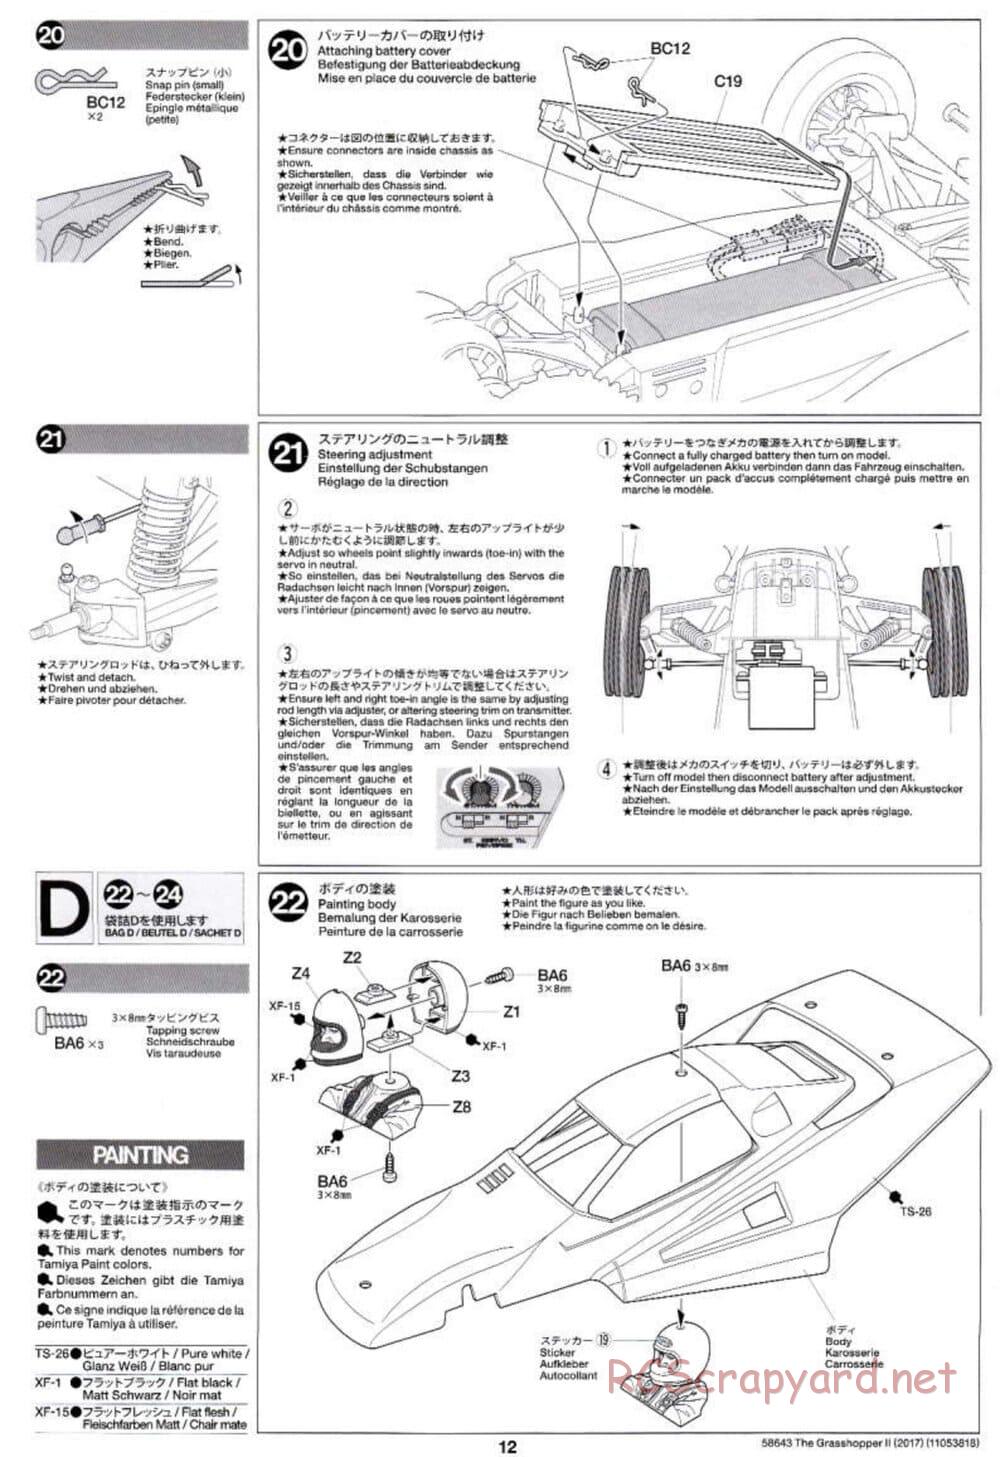 Tamiya - The Grasshopper II (2017) - GH Chassis - Manual - Page 12